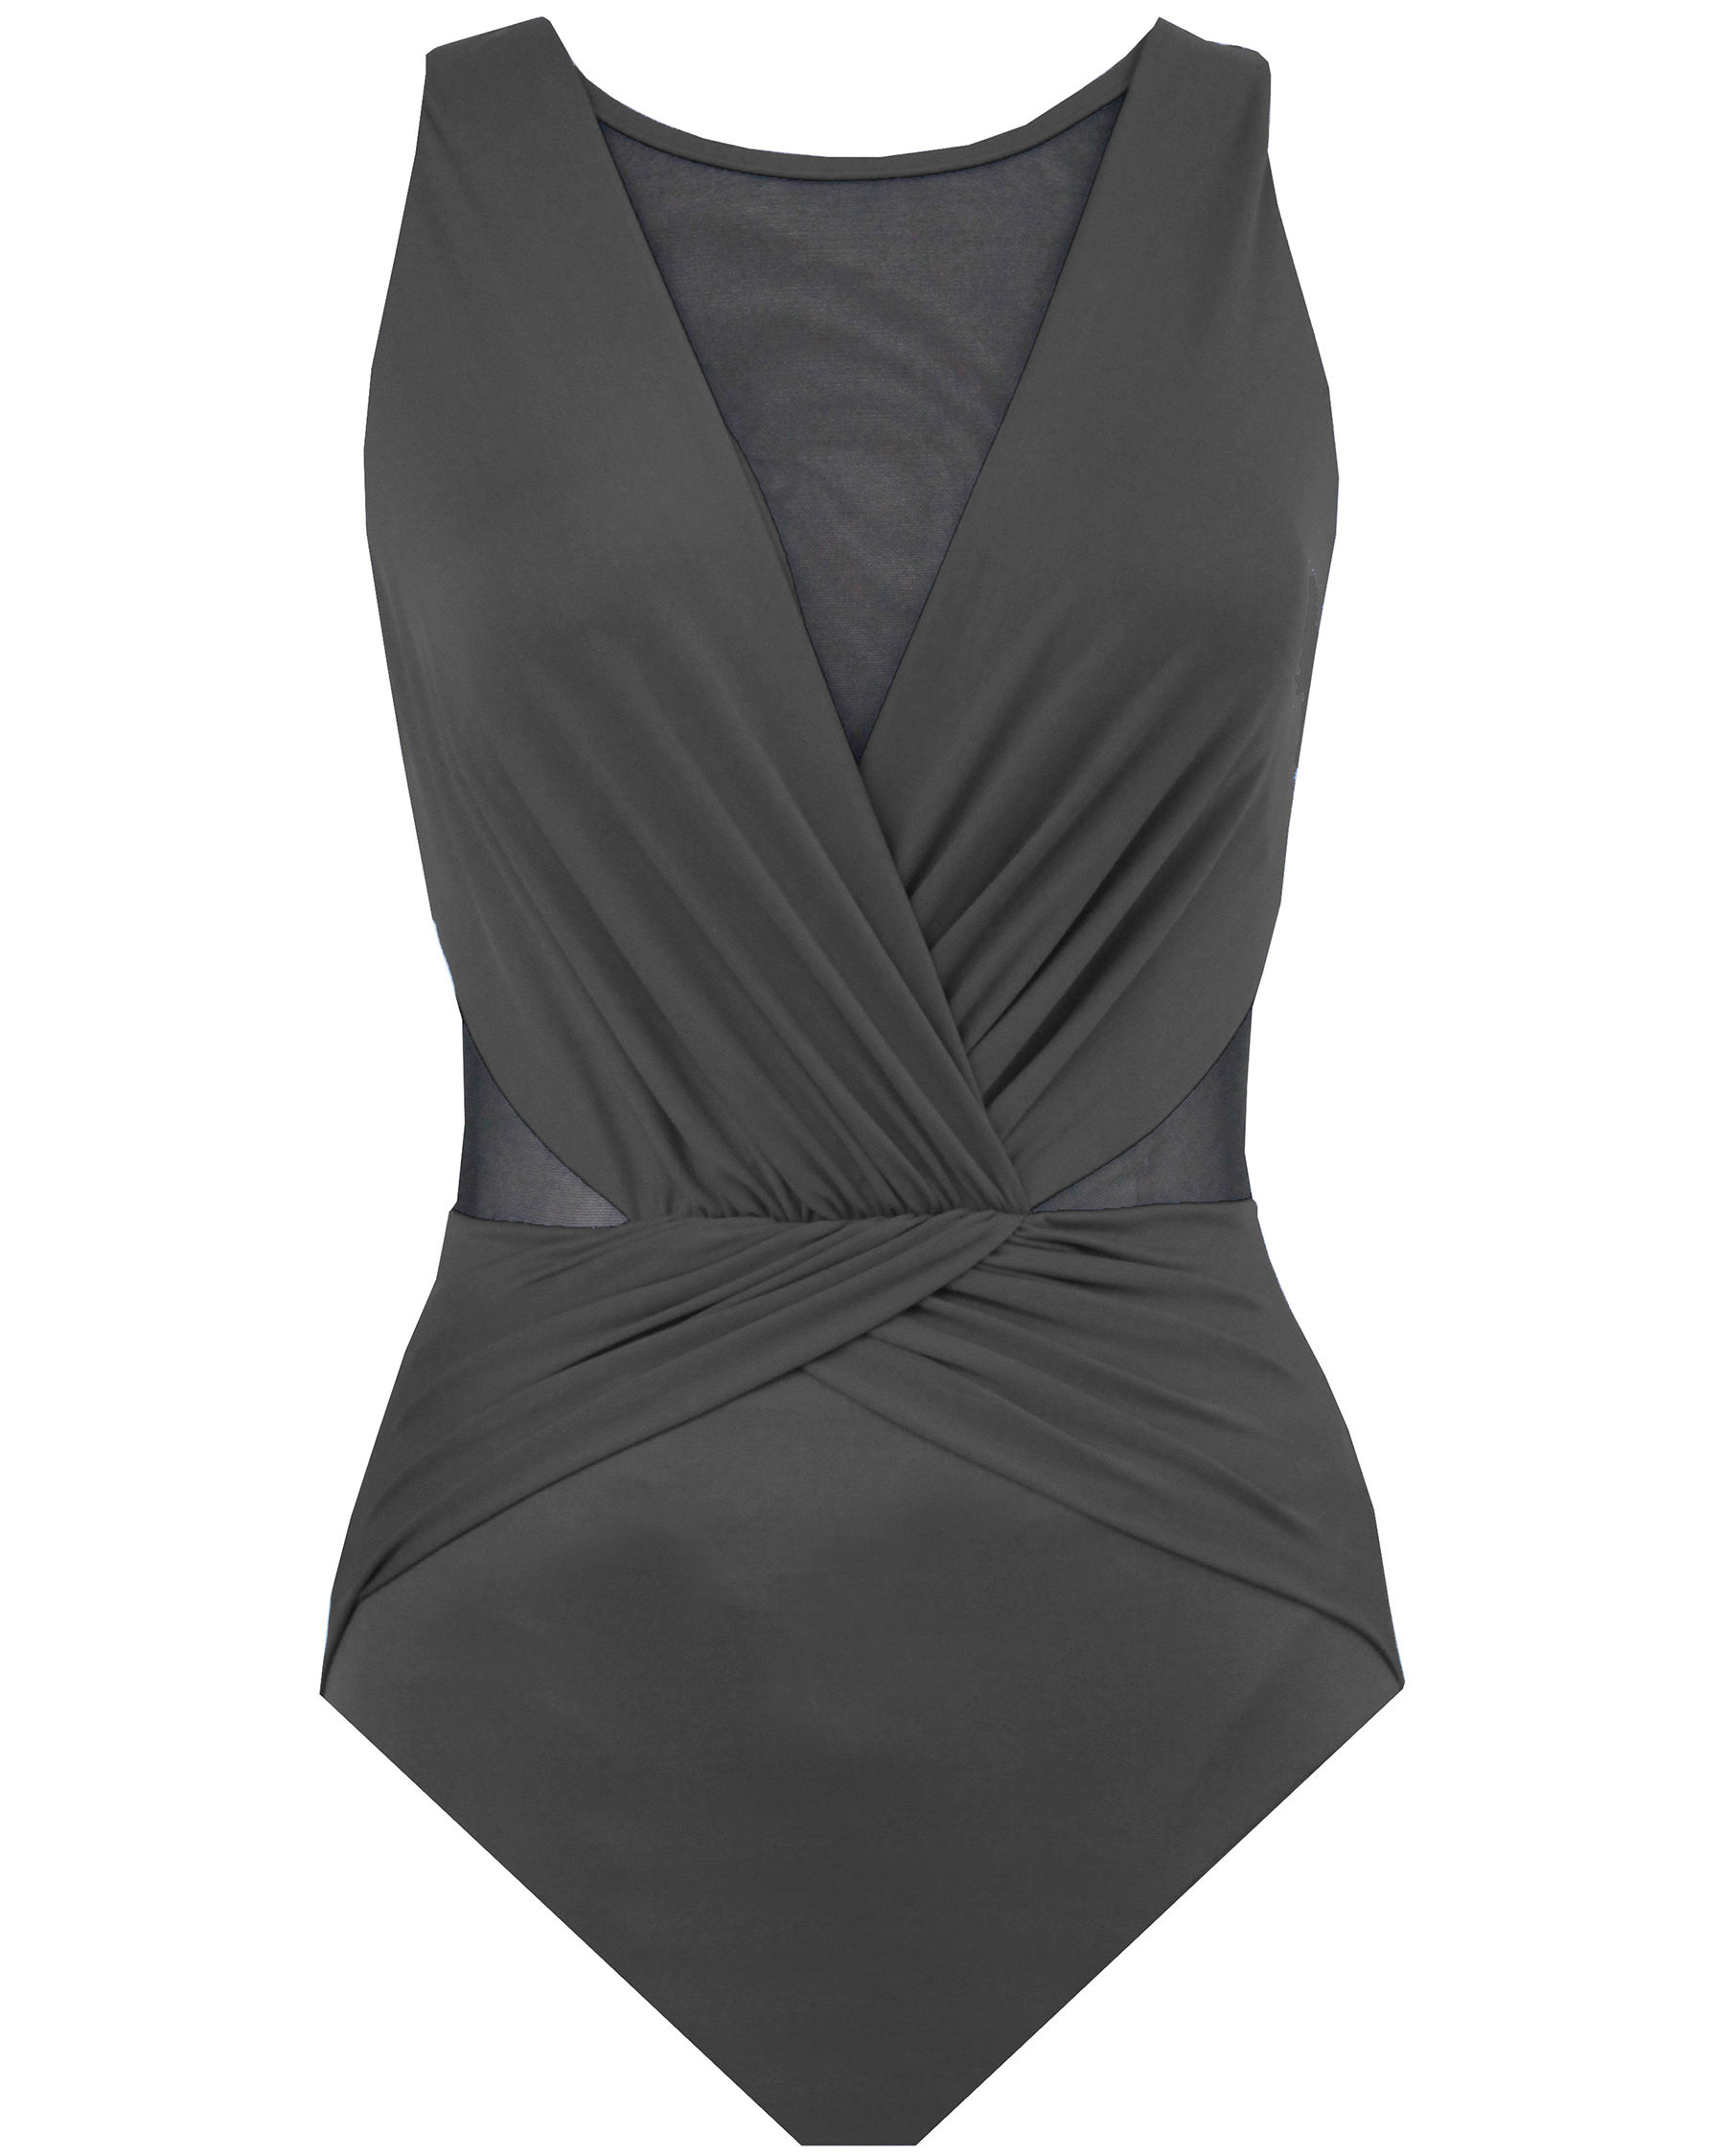 MIRACLESUIT One-piece Swimsuit Black 6516685-06 - View1